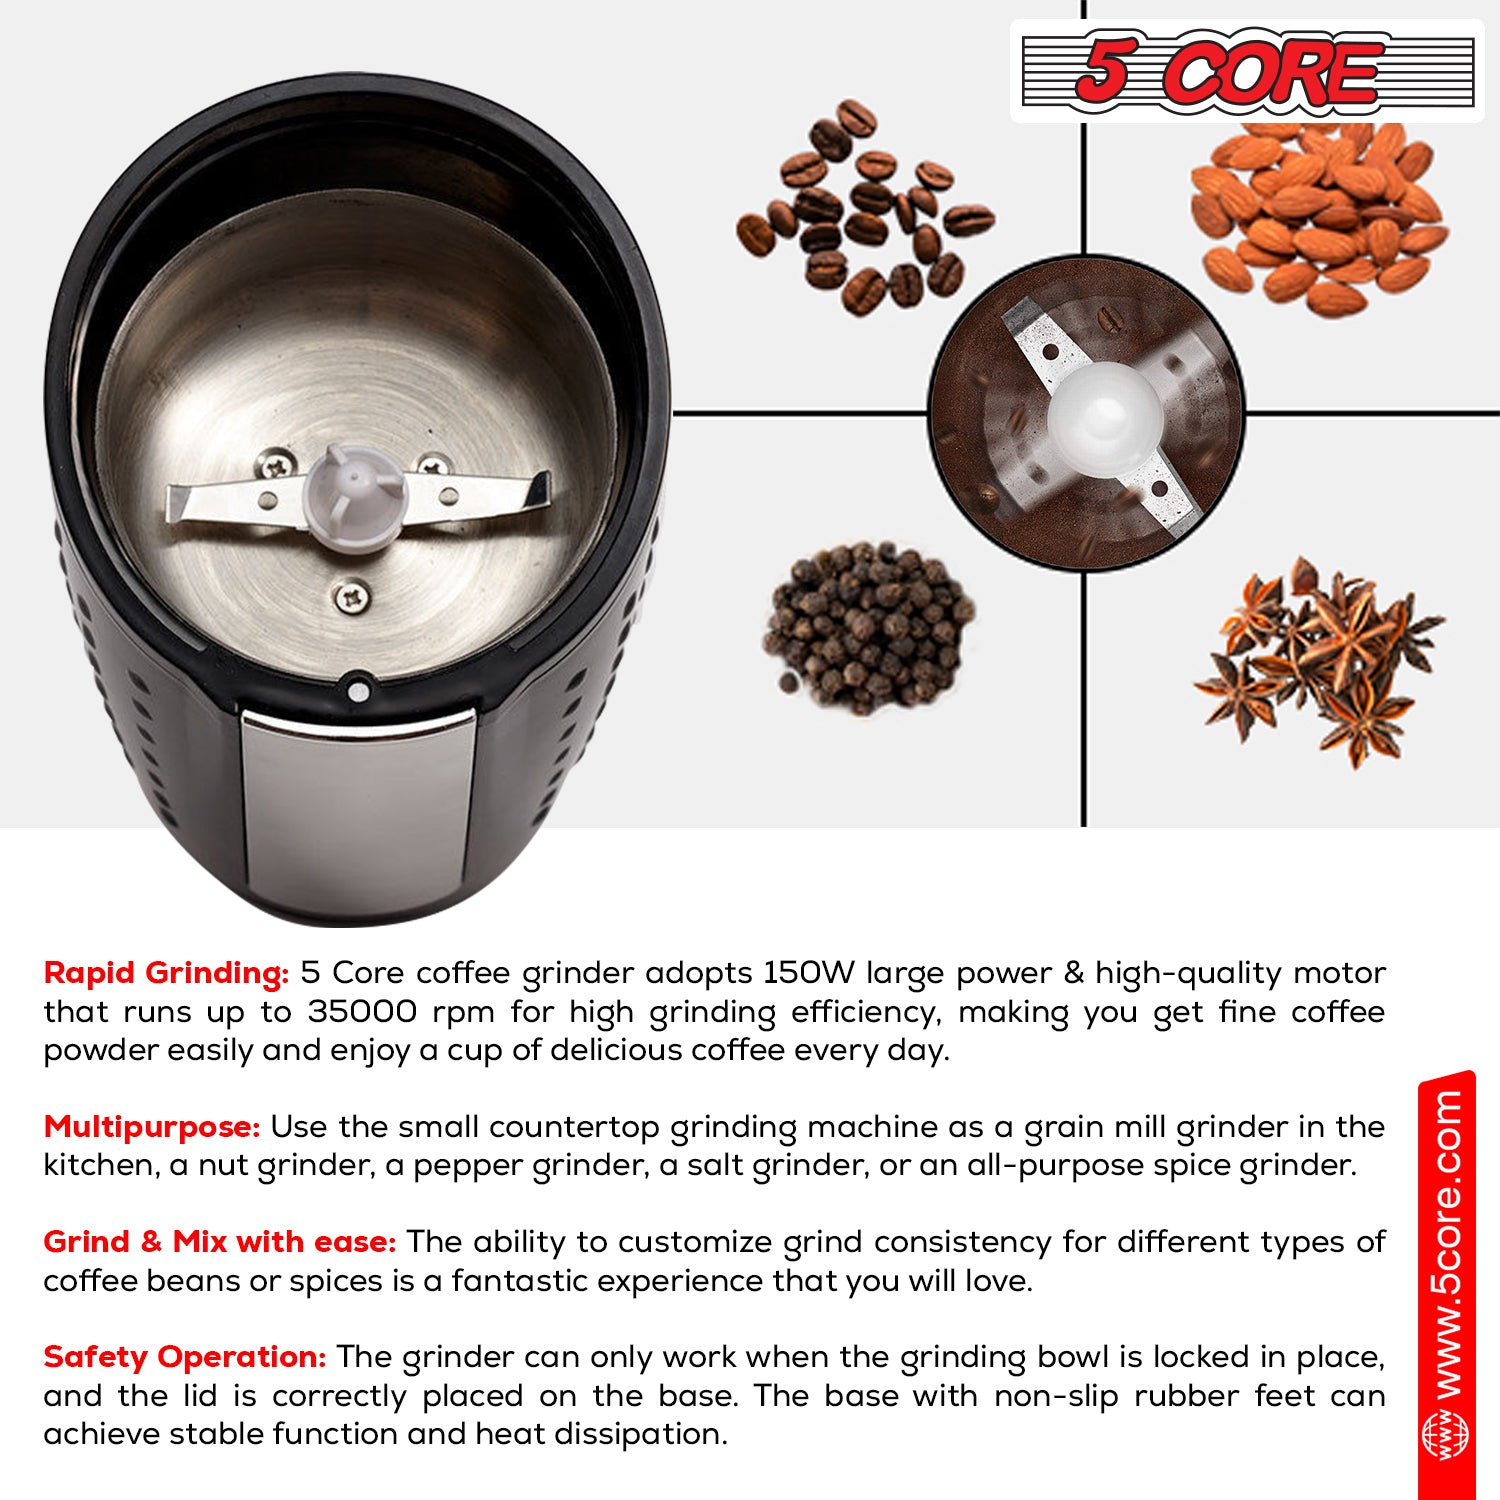 Enjoy freshly ground spices with the versatile 5 Core spice grinder.